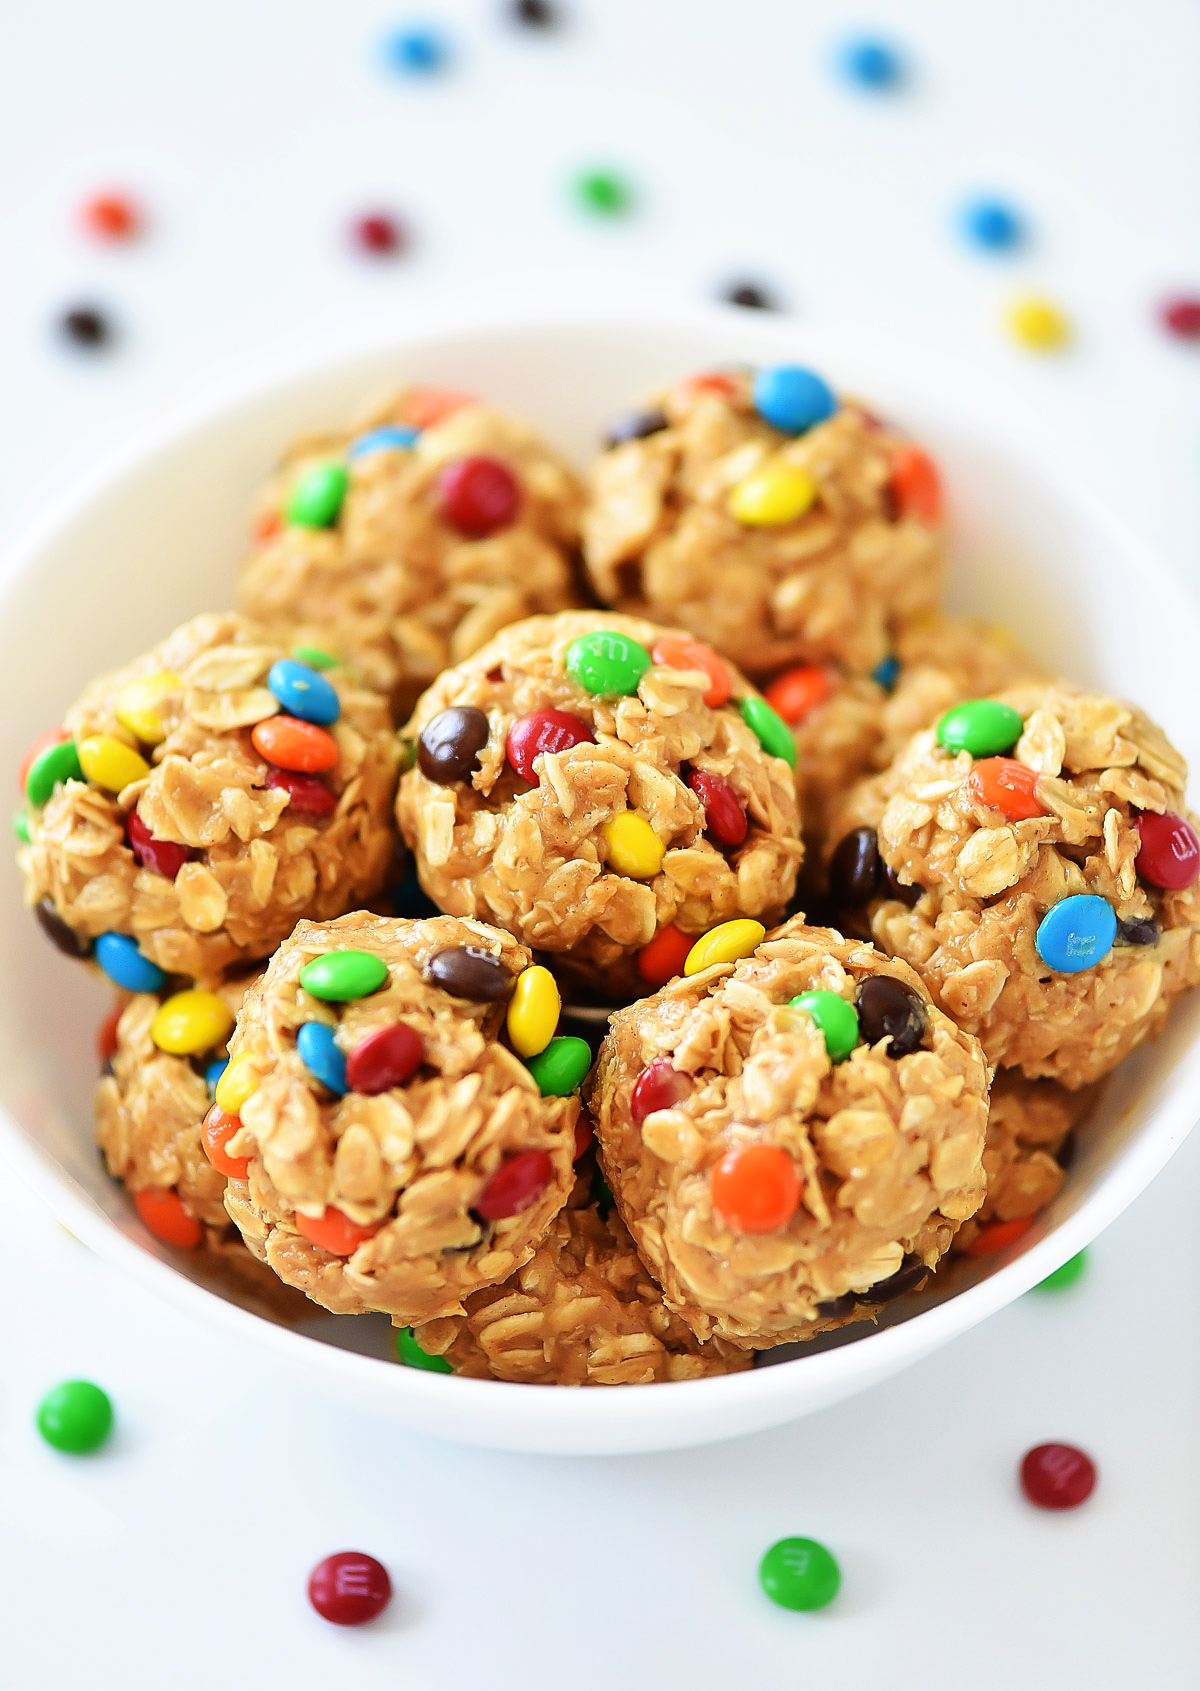 No Bake M&M Energy Bites are delicious bite-sized snacks made with oats, M&M’s, peanut butter, honey and vanilla extract. Life-in-the-Lofthouse.com